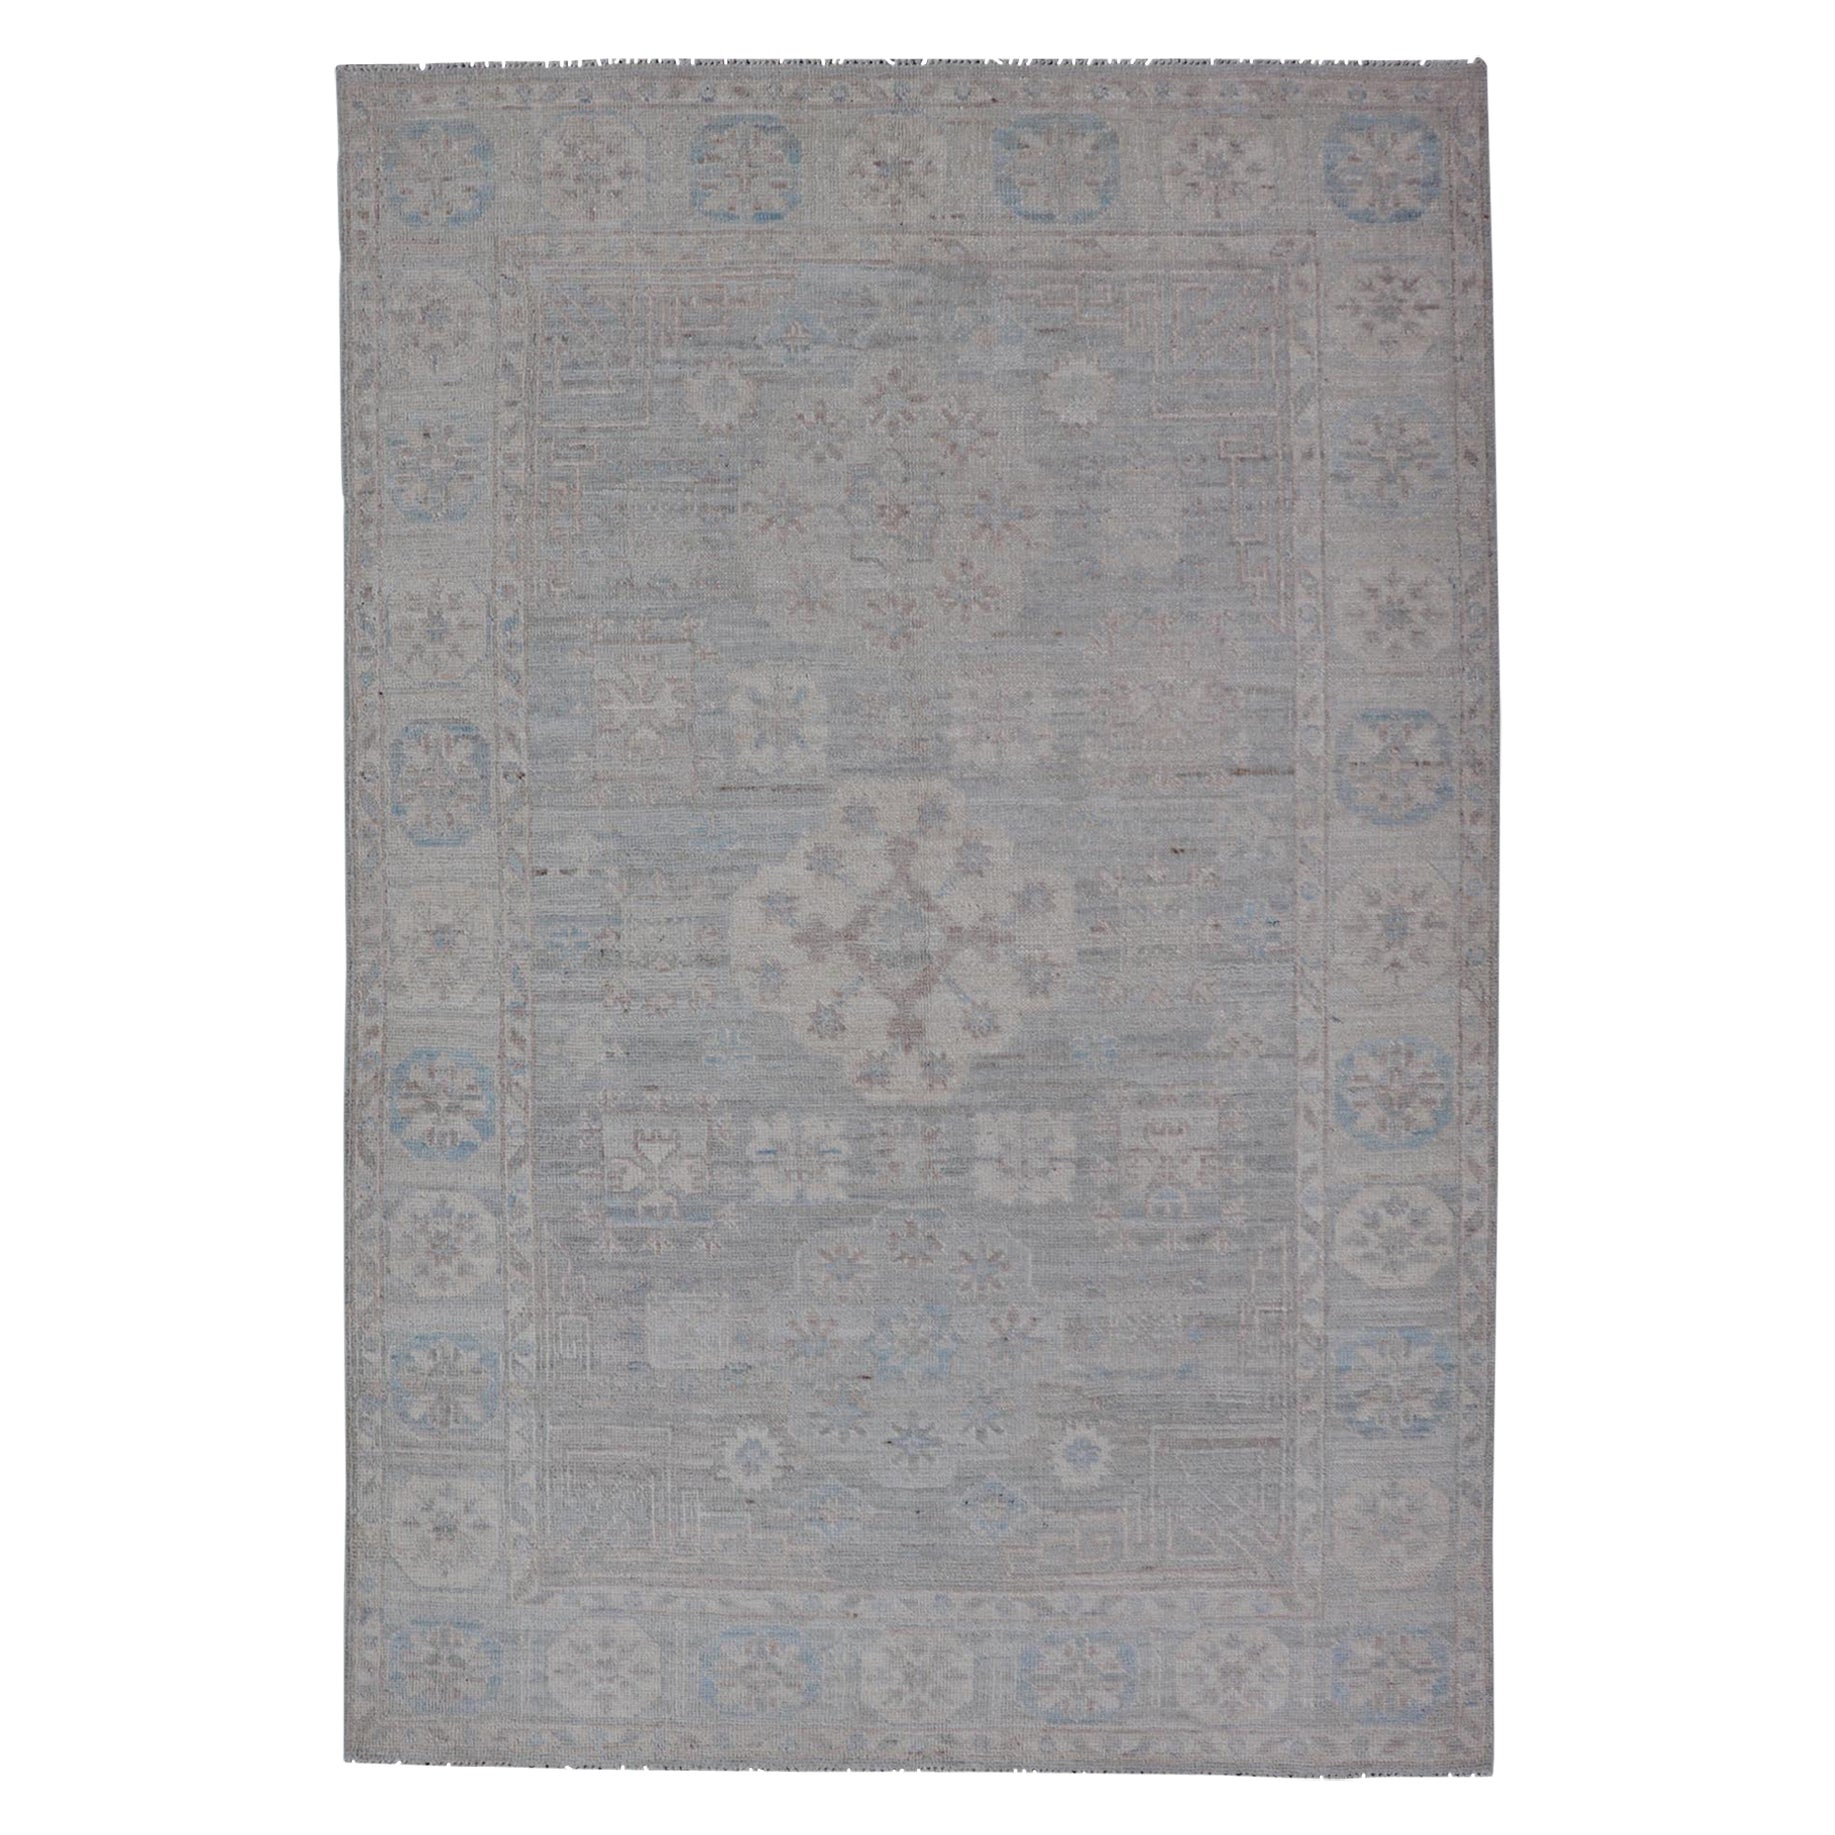 Contemporary Khotan with Circular Medallions in Light Colors For Sale